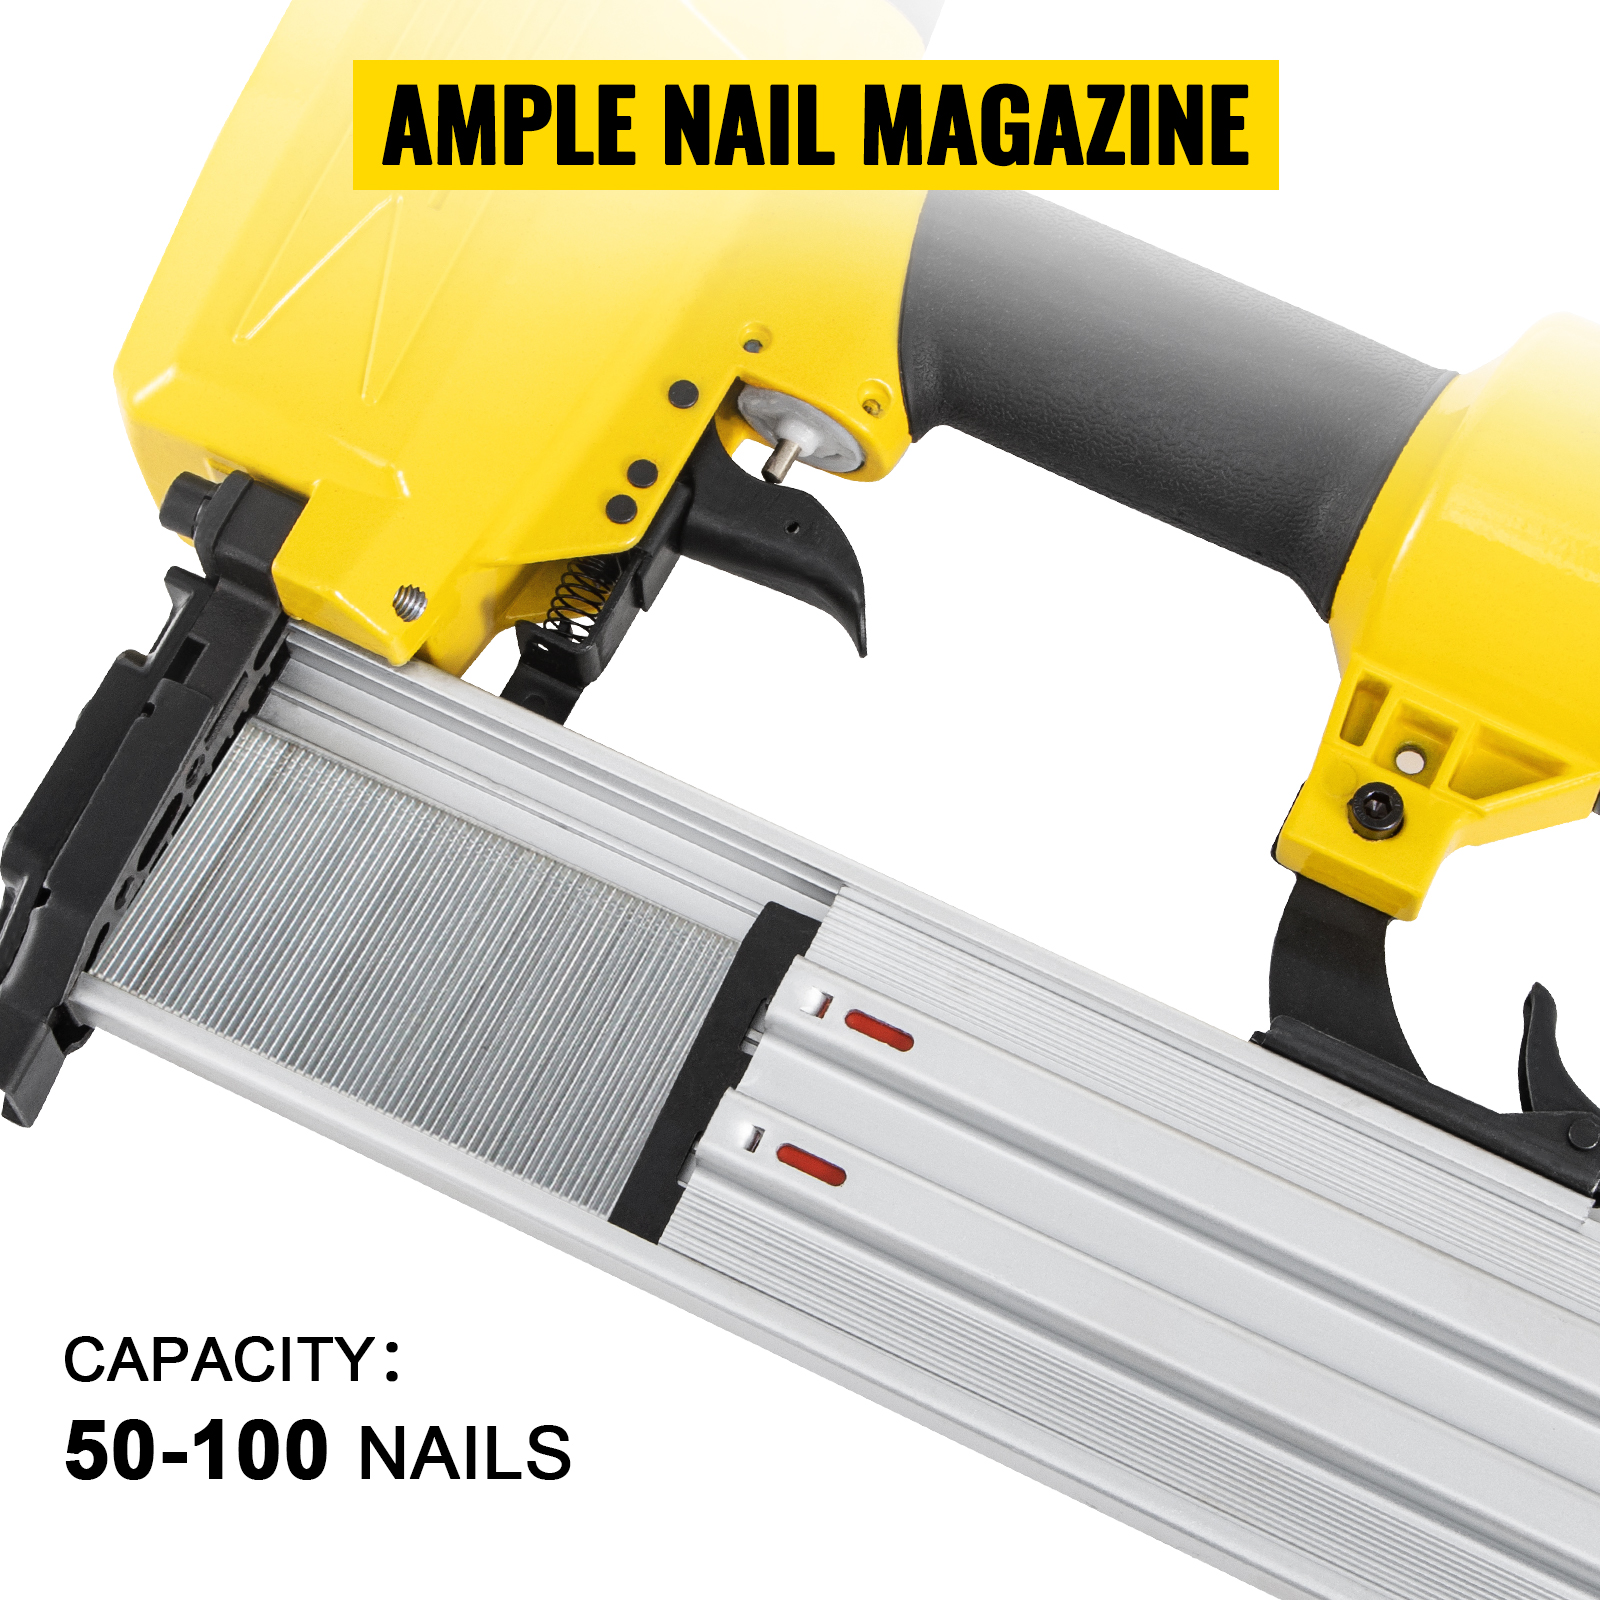 What a Concrete Nail Gun Is and How to Use It